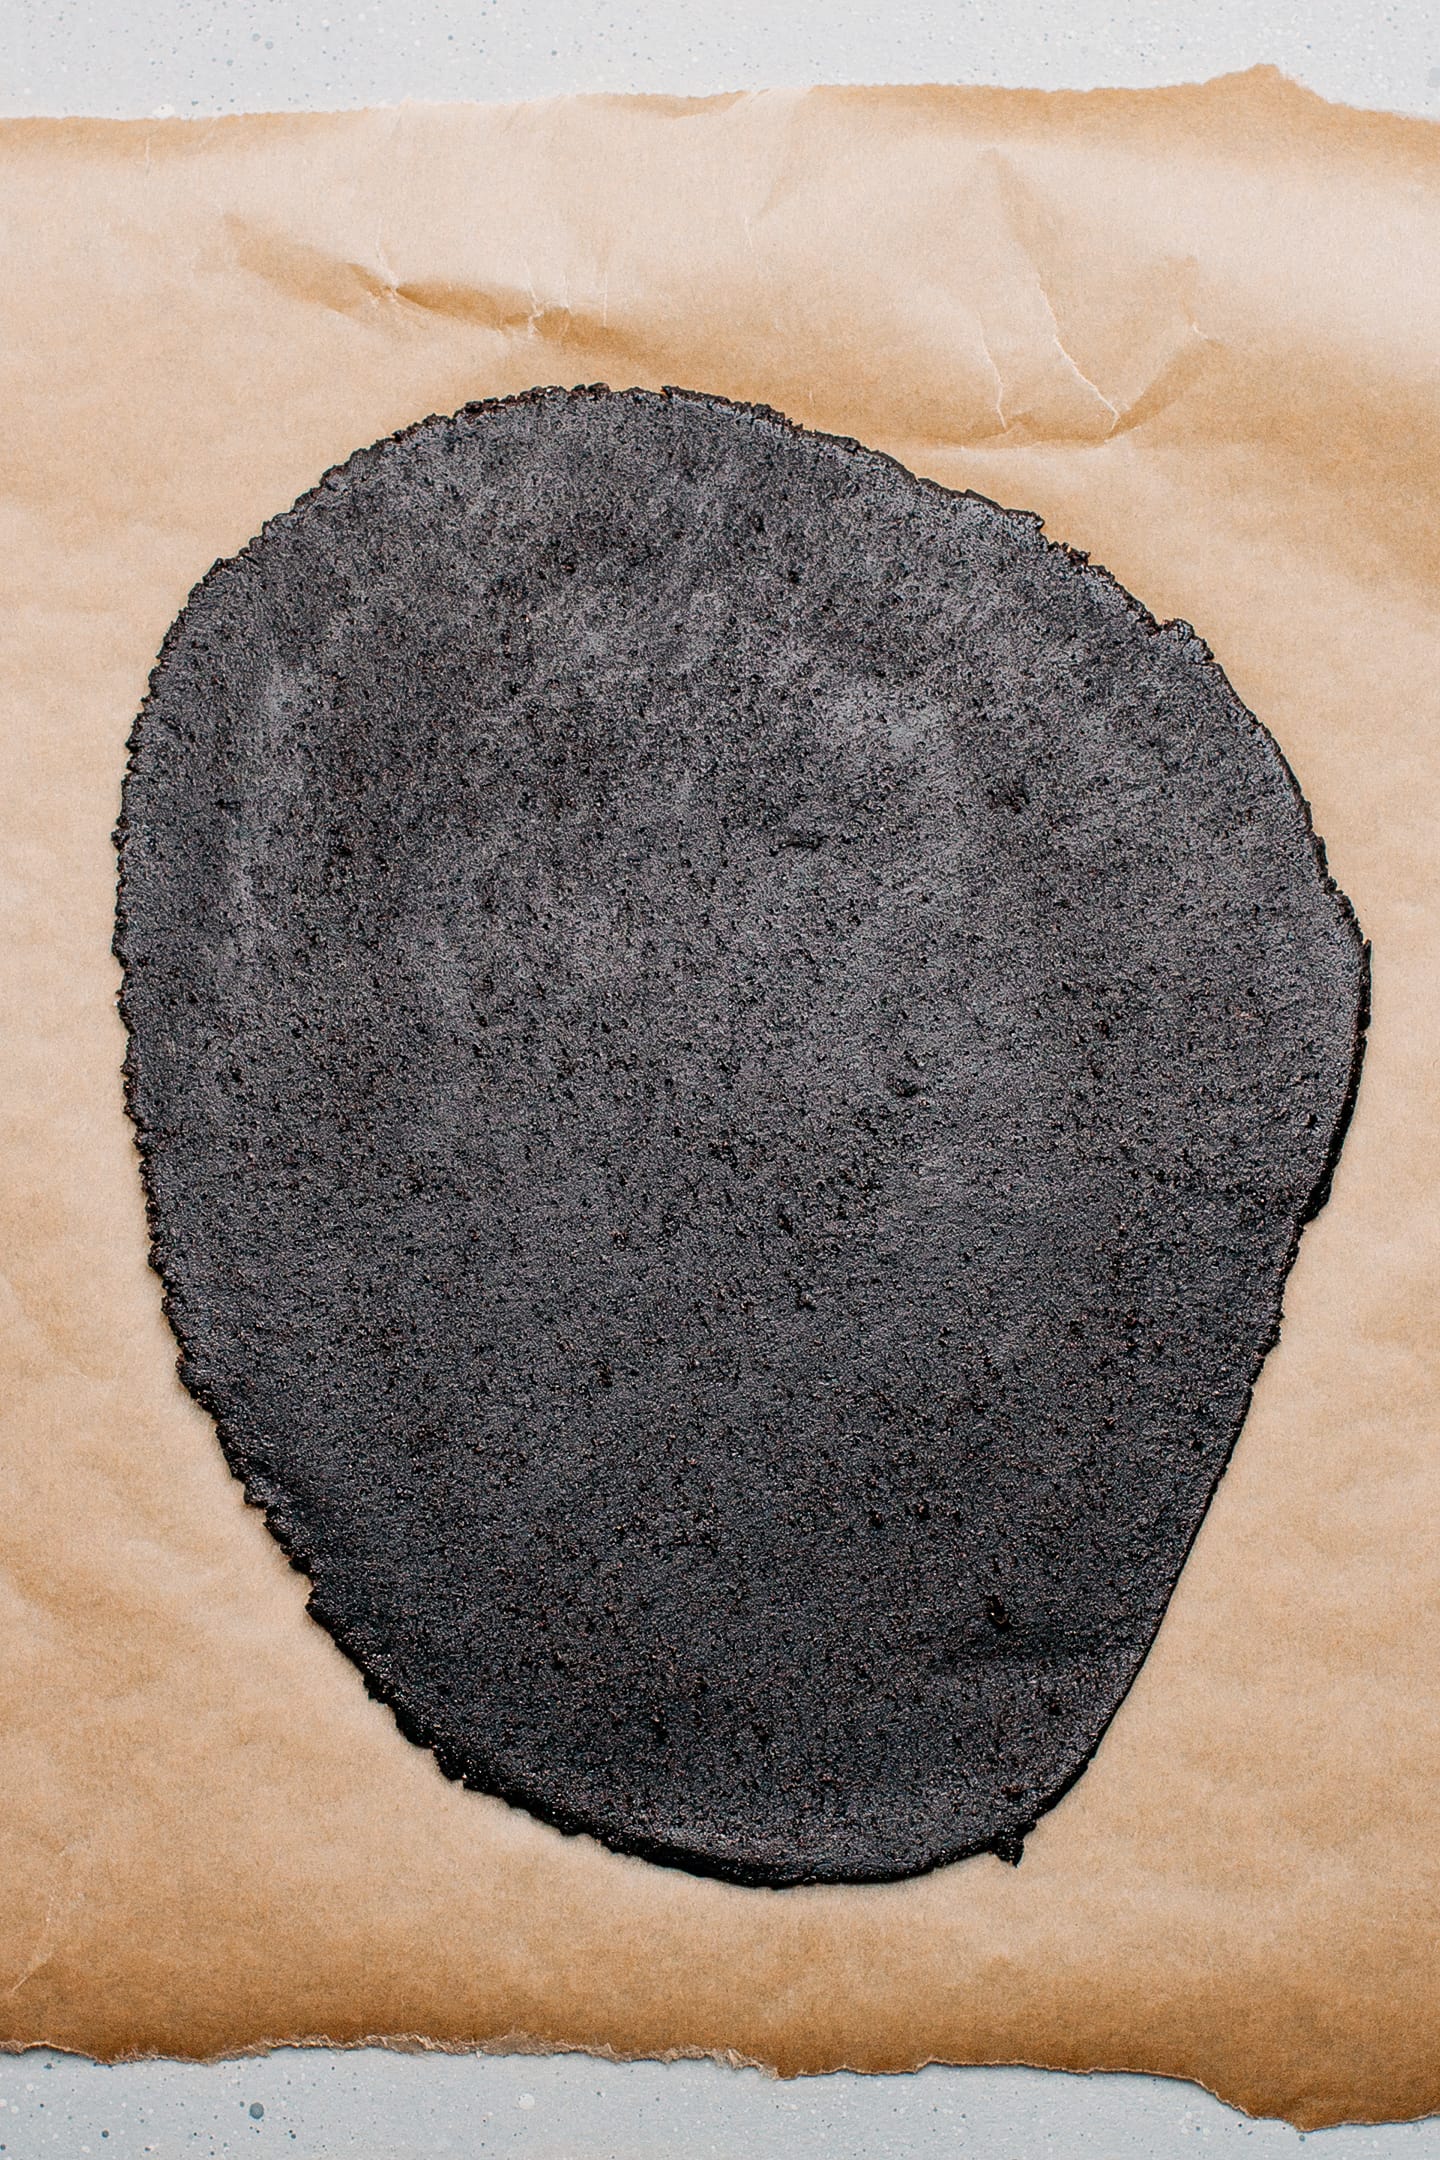 Flattened cooking dough on a piece of parchment paper.